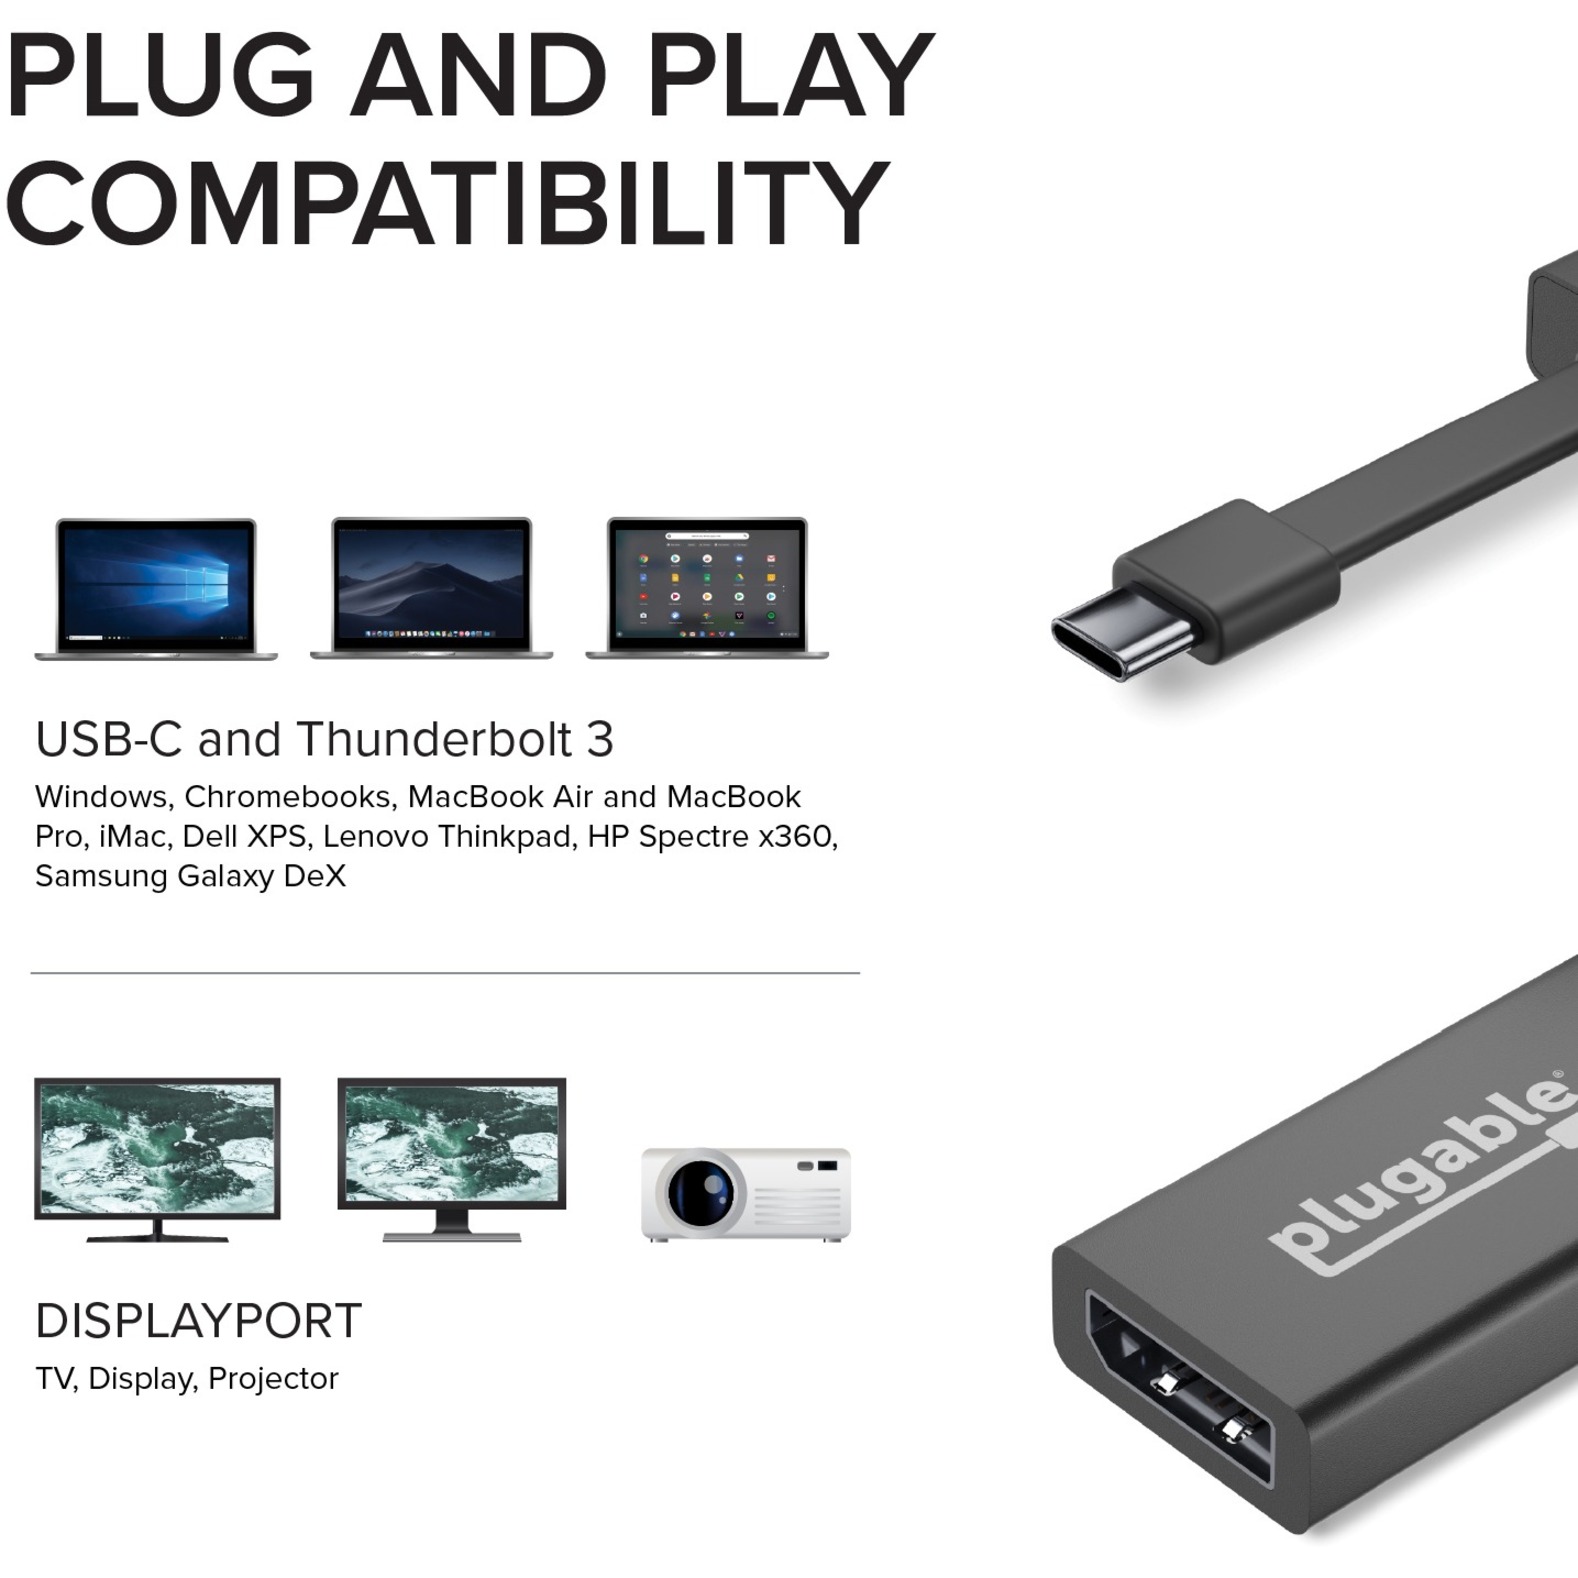 Plugable USB C to DisplayPort Adapter 4K 60Hz, Thunderbolt 3 to DisplayPort Adapter Compatible with MacBook Pro, Windows, Chromebooks, iPad Pro, Dell XPS, and more - image 4 of 5